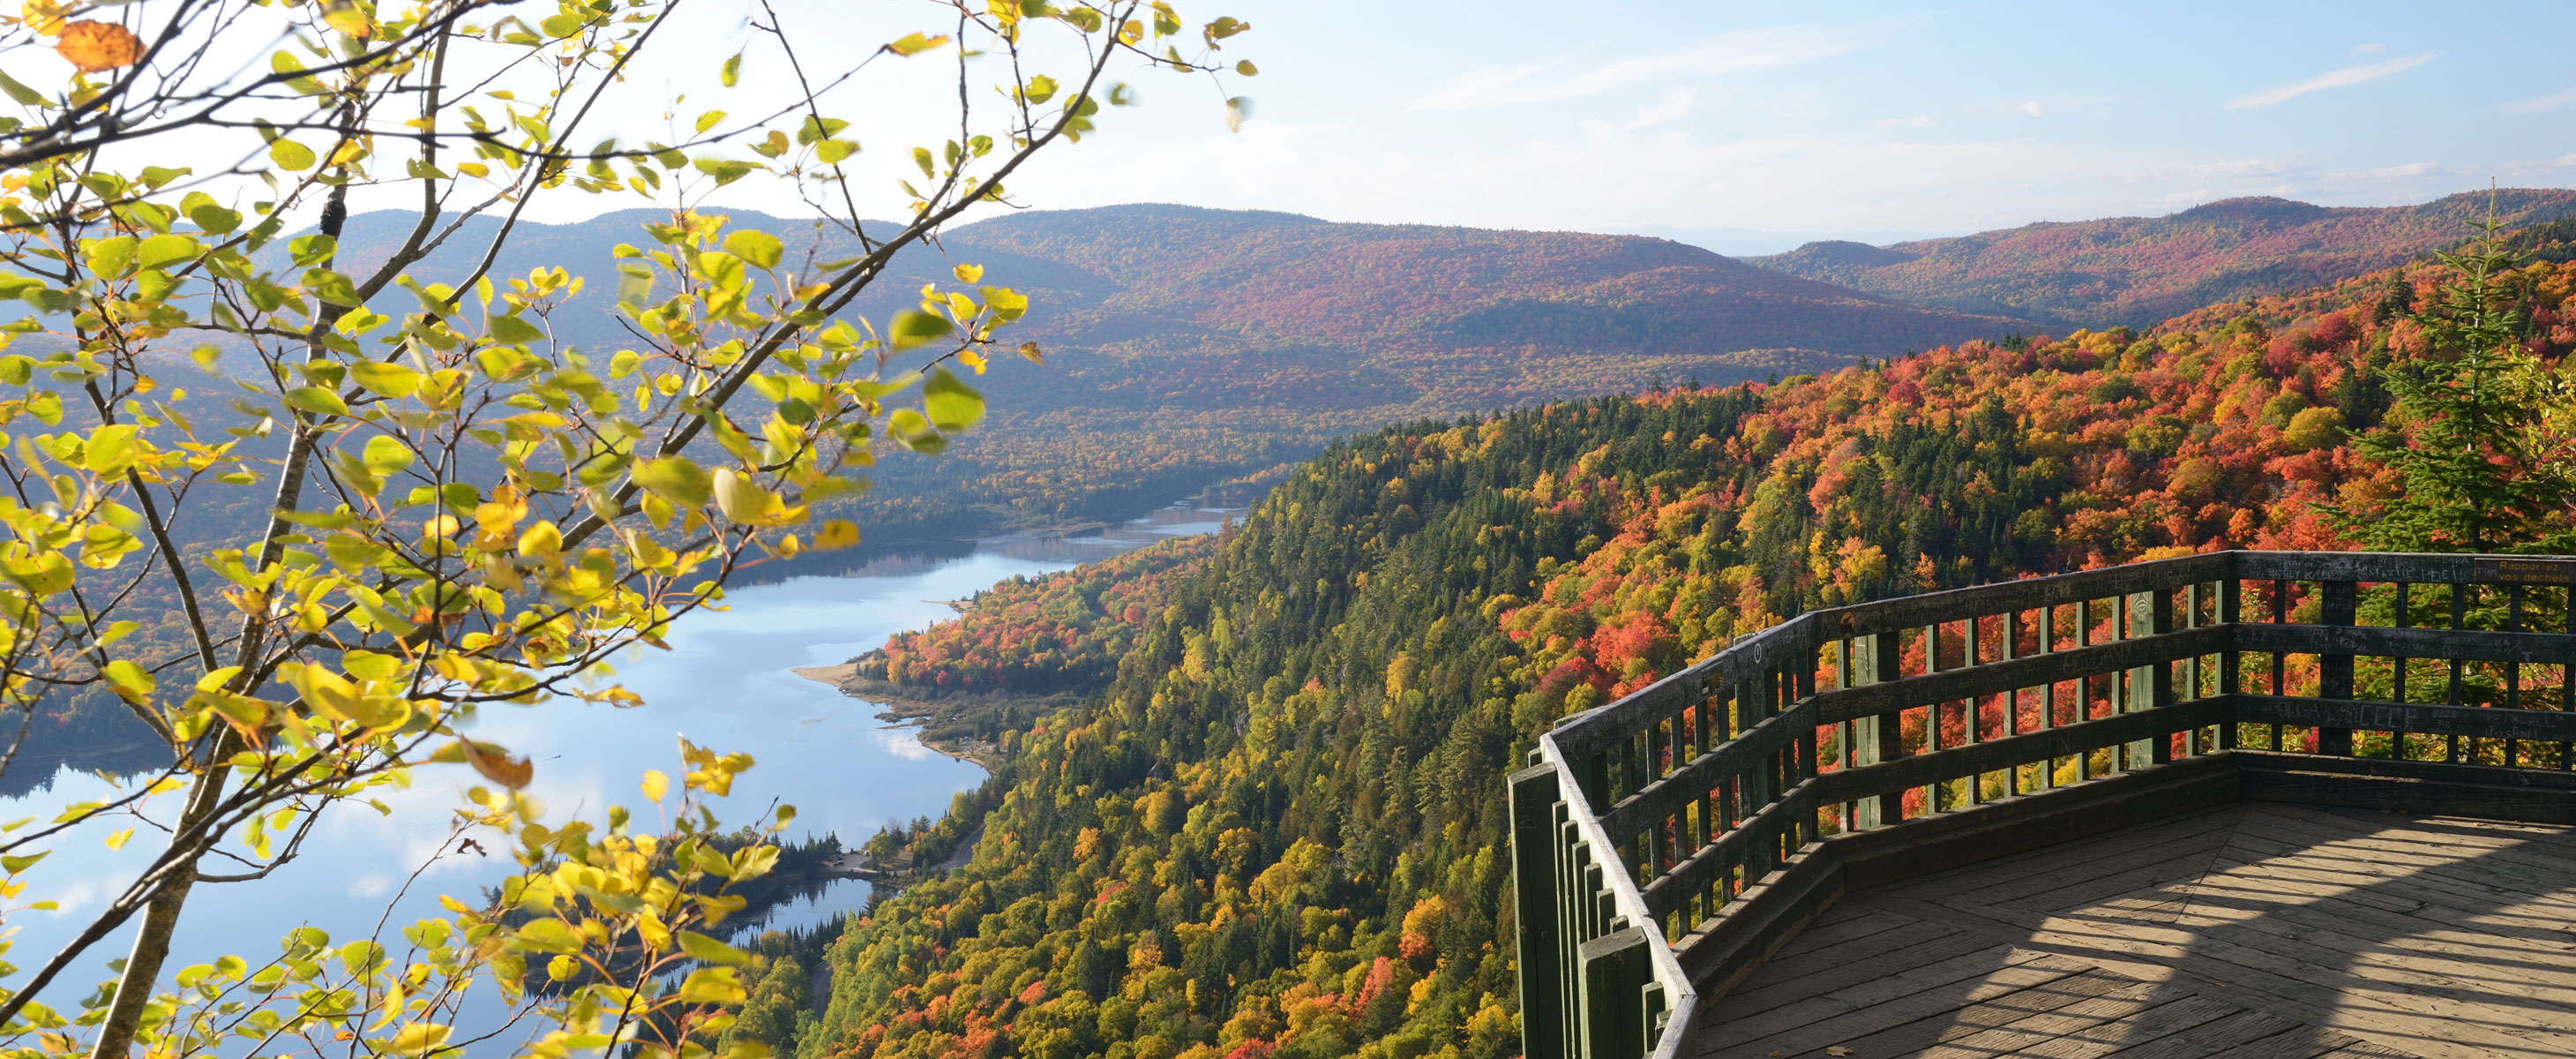 Take a road trip this fall to see the vast outdoors of Quebec